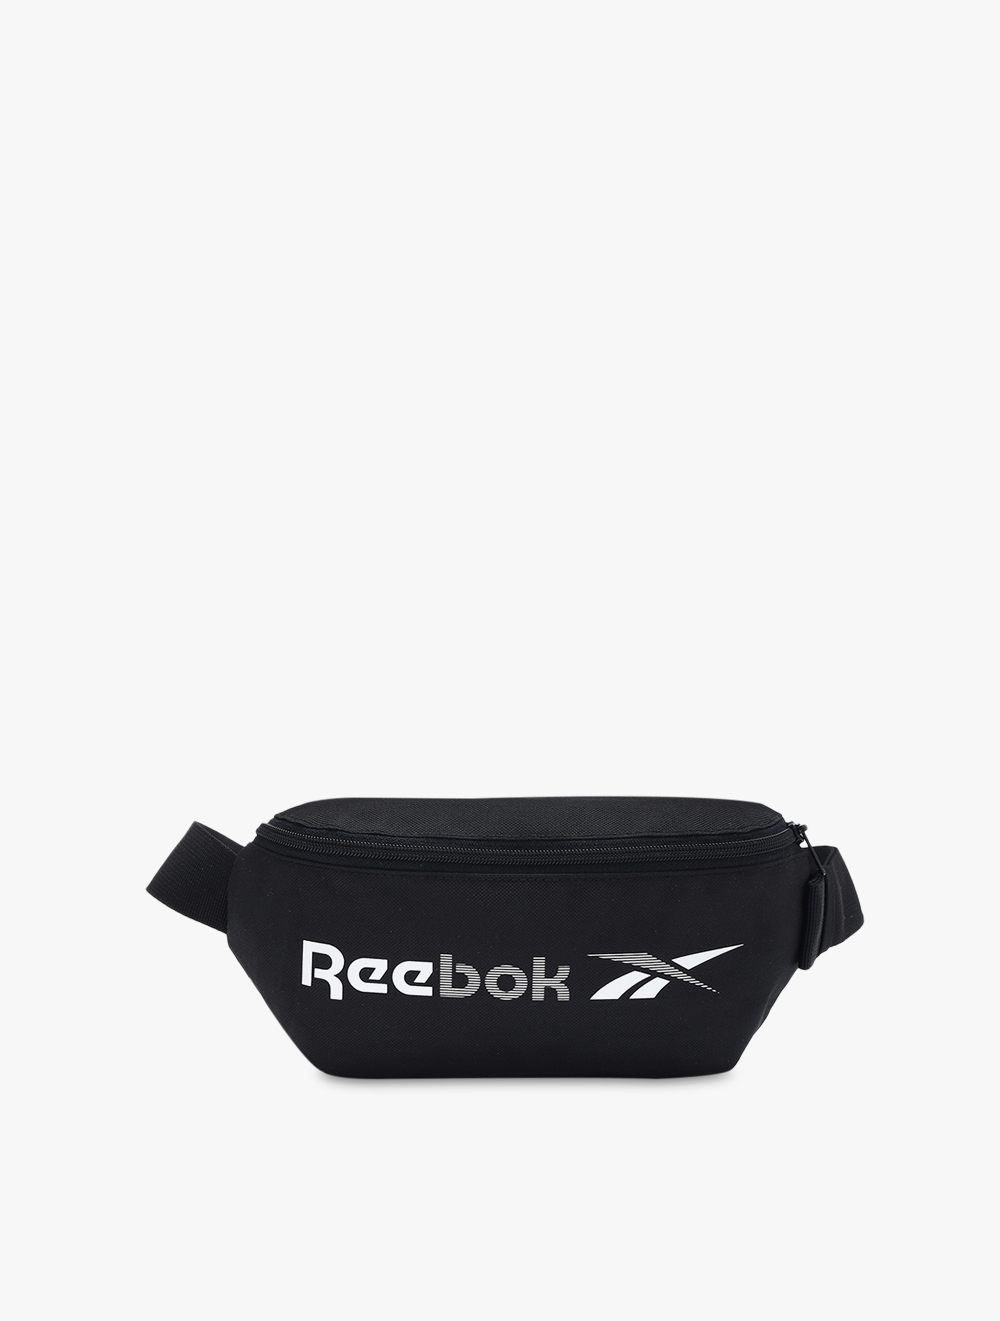 reebok official indonesia